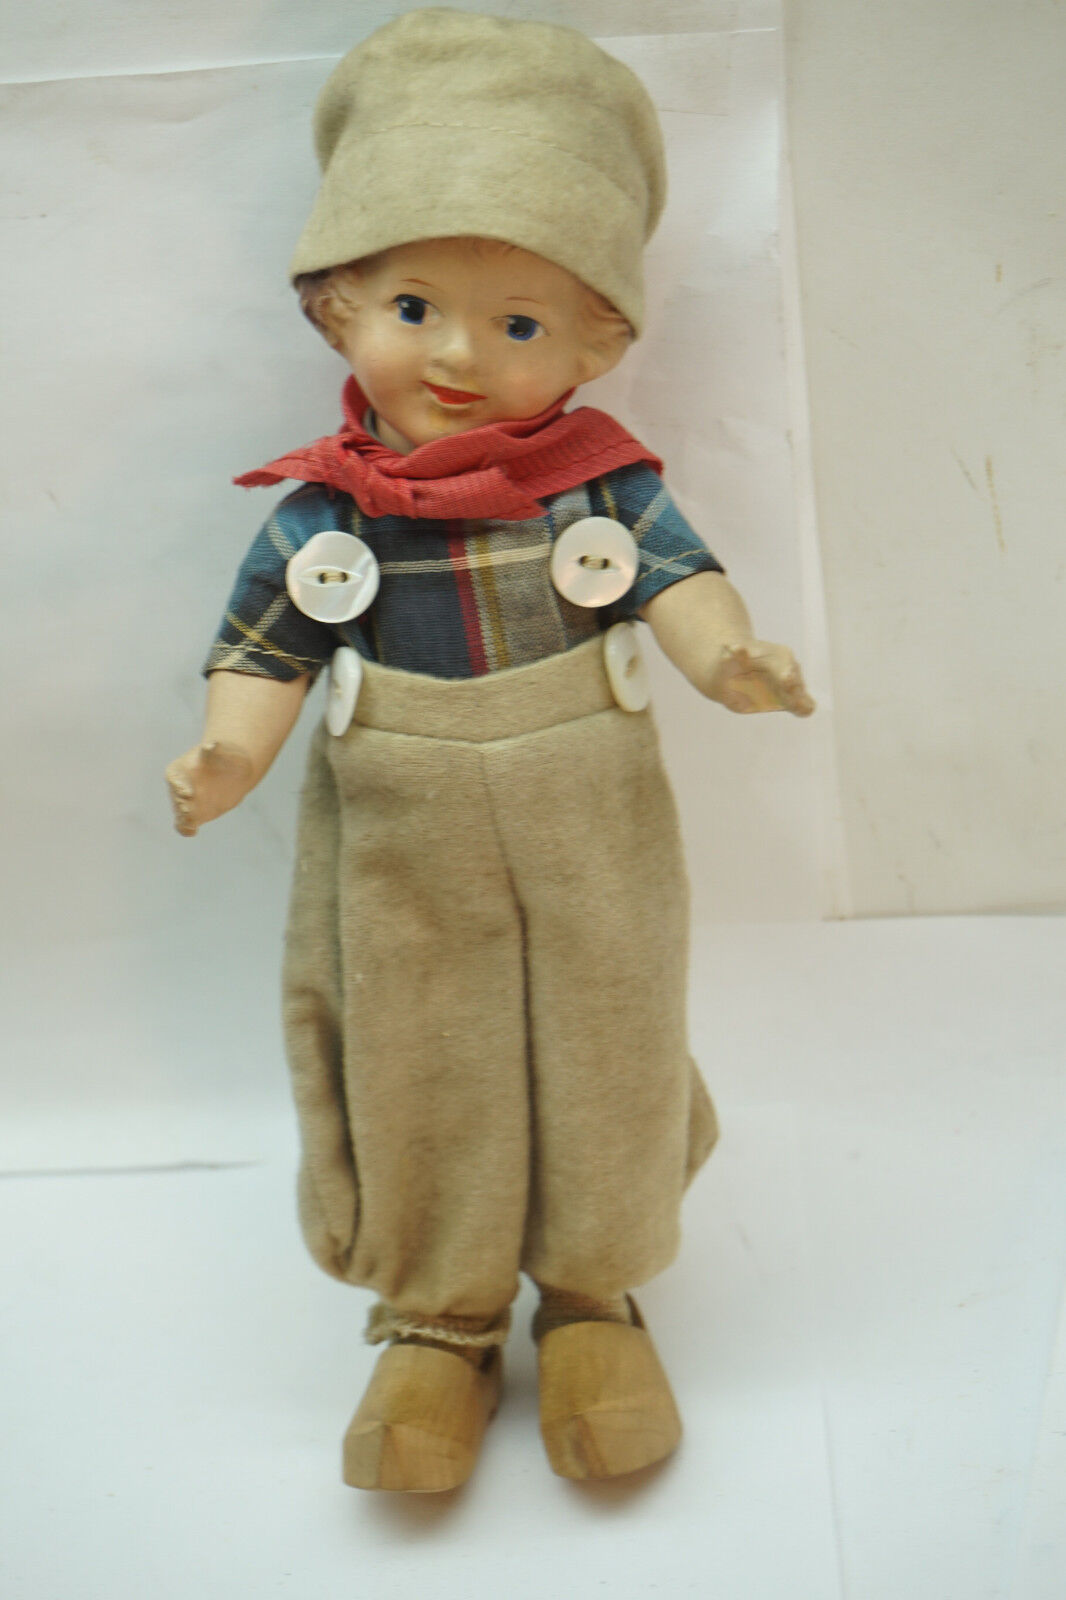 VINTAGE ARRANBEE DOLL BOY COMPOSITION DUTCH JOINTED 9in R&B COMPO 1930s 